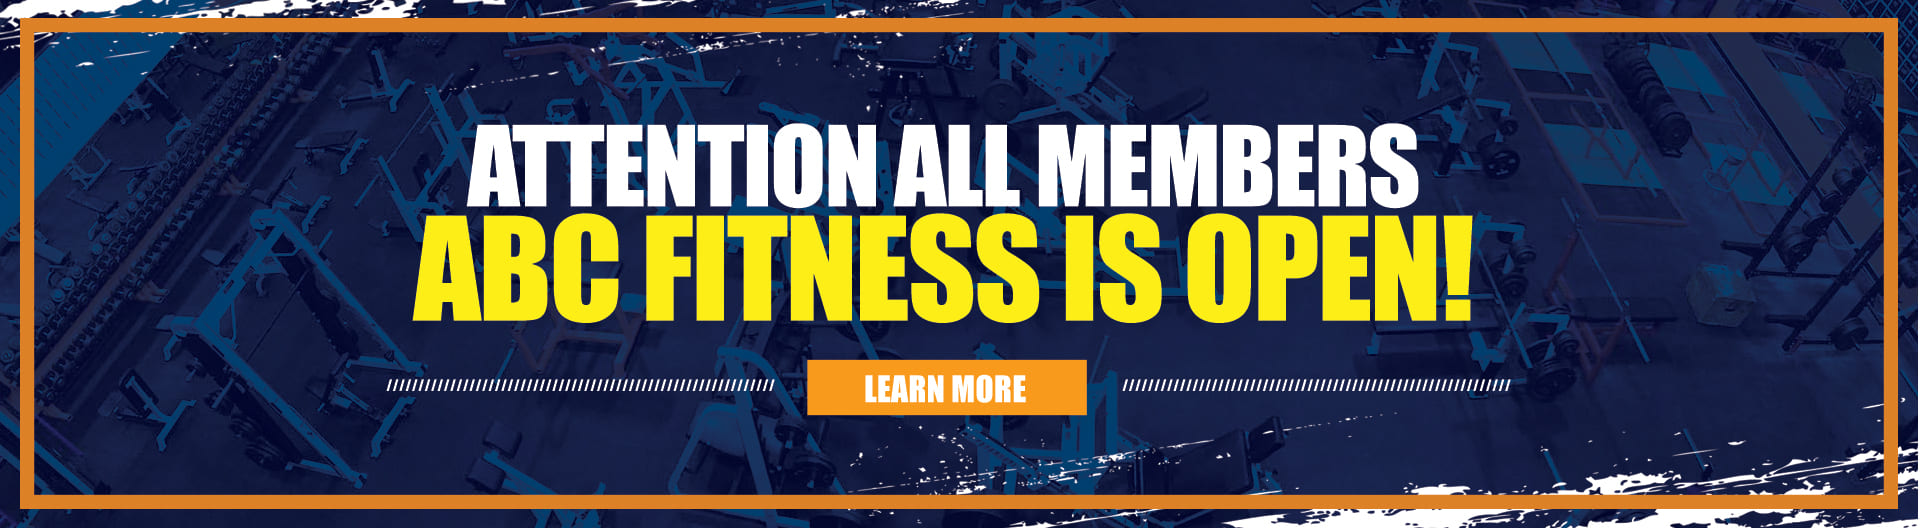 ABC Fitness is Re-Opening Monday, August 24, 2020 at 5AM